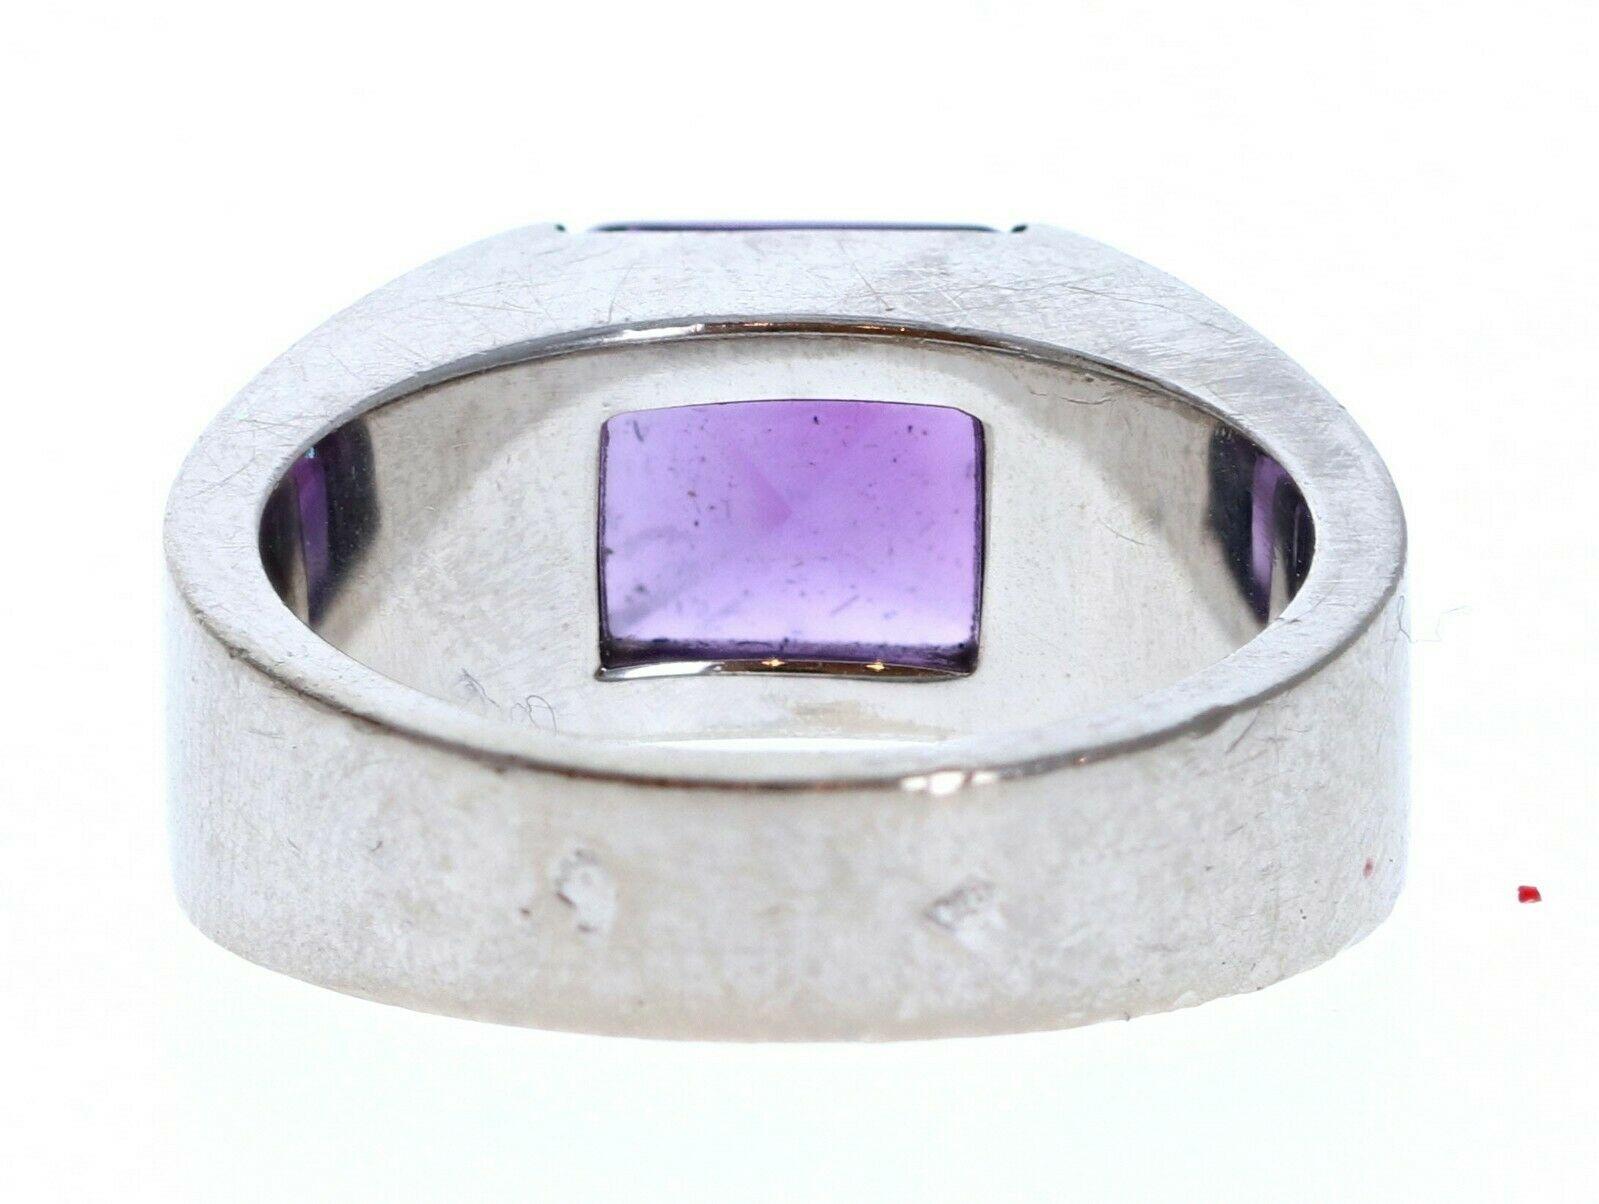 Square Cut Large Authentic Cartier Tank 18k White Gold & Amethyst Wide Ring 13.4g